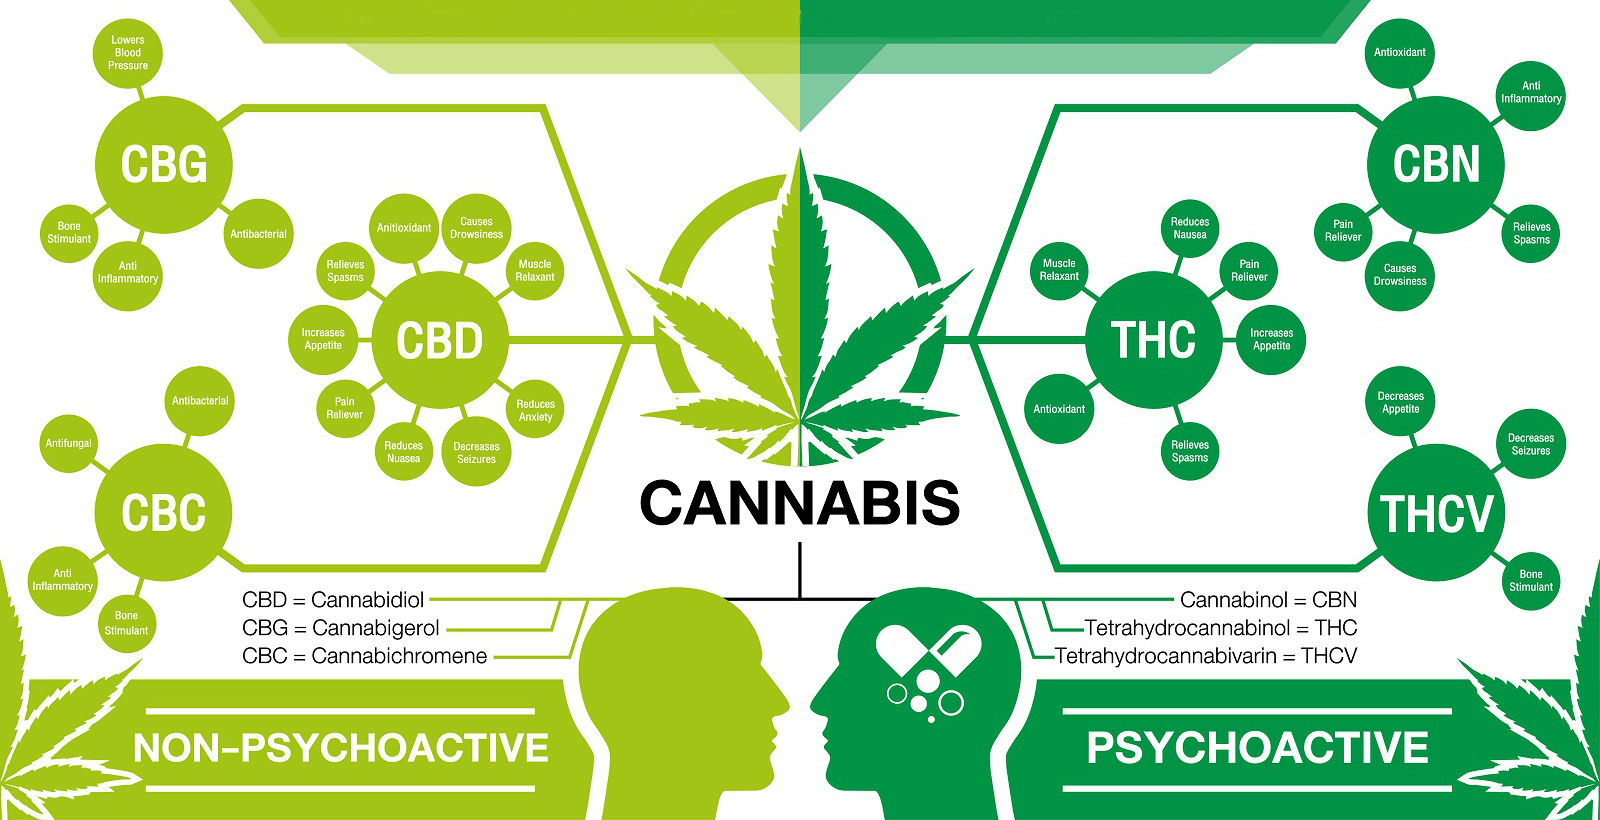 infographic depicting various cannabinoids, like CBN, and their effects